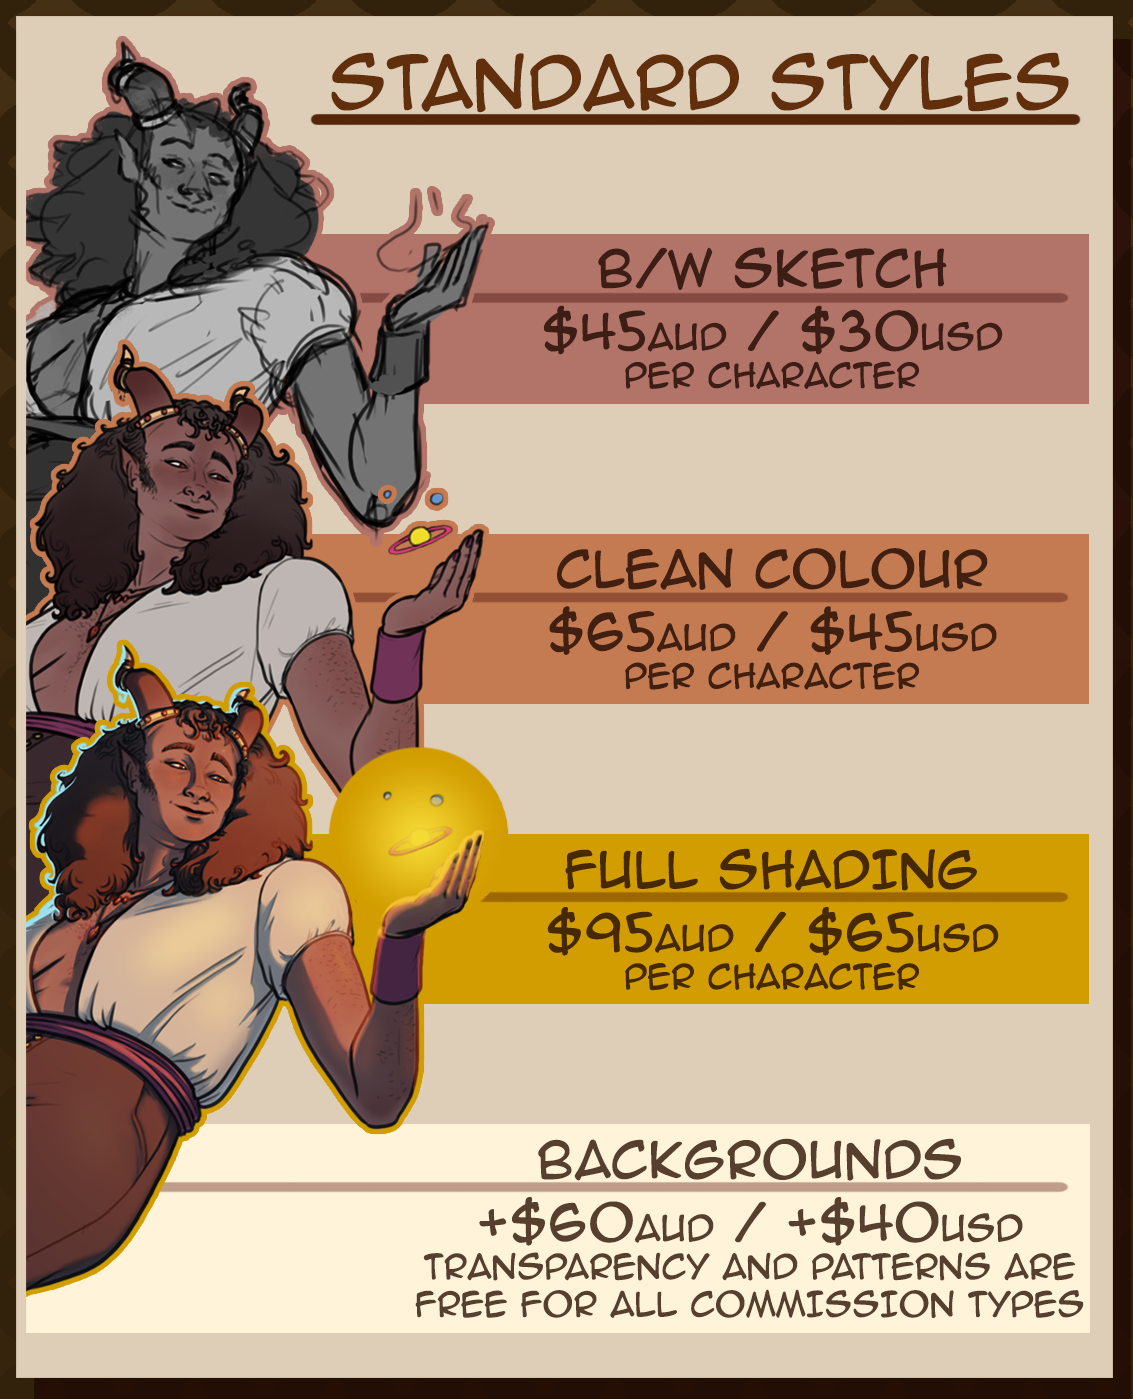 A list of standard style prices for commissions. A text version of the image is below it